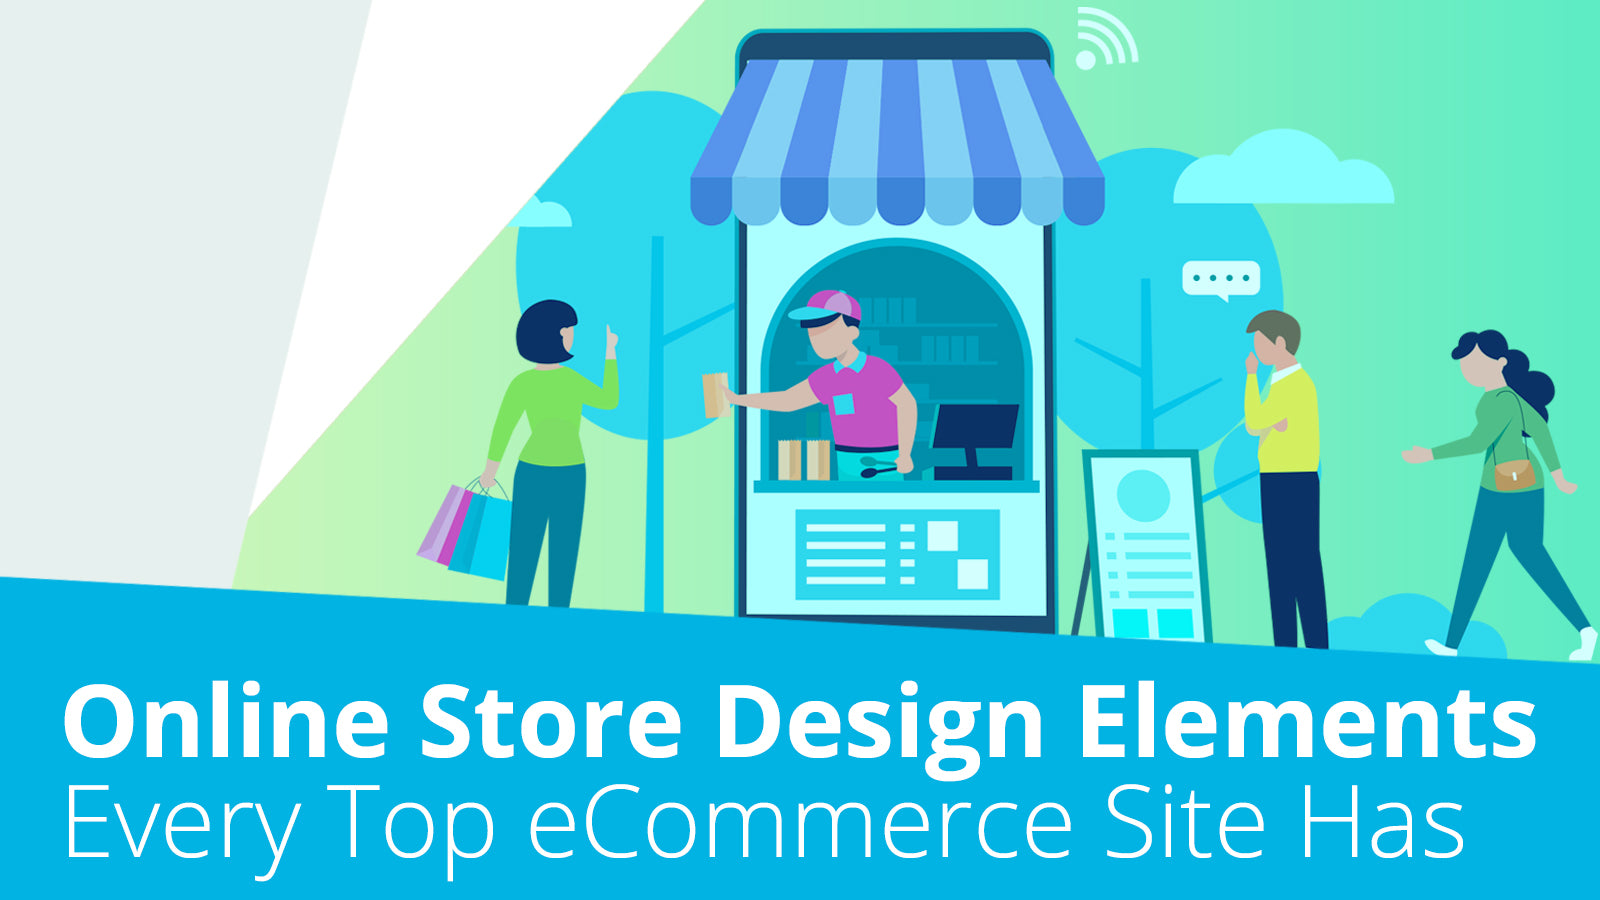 Design Elements Every Top Ecommerce Site Has